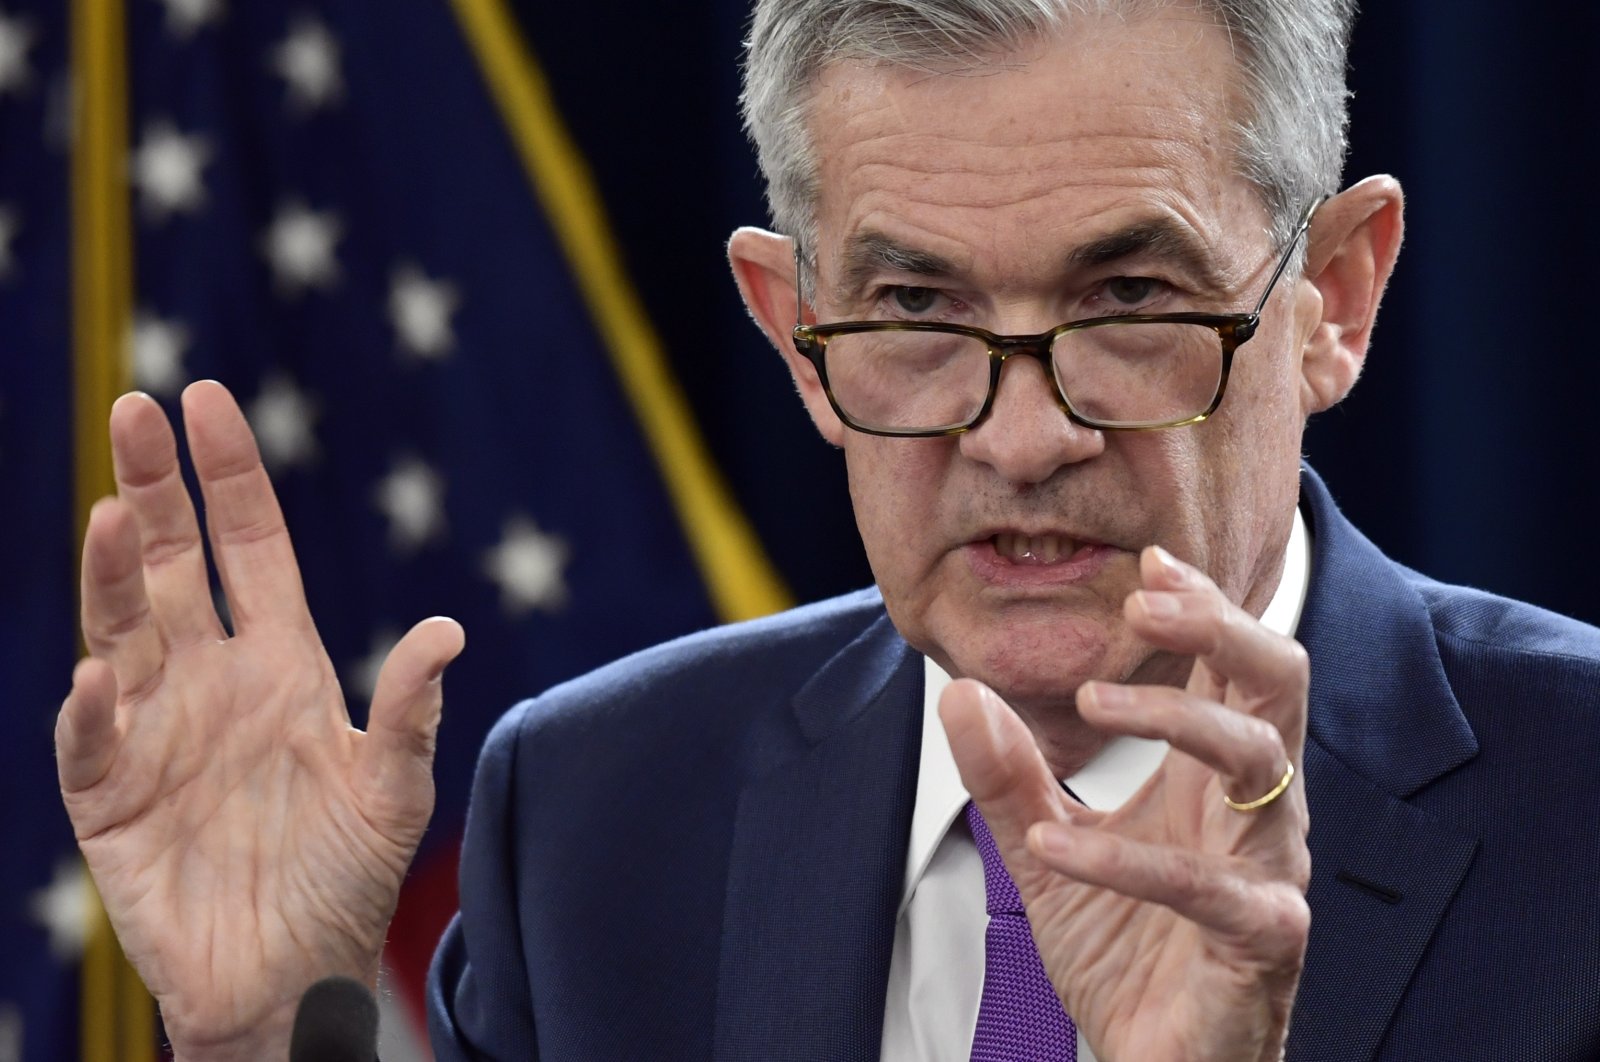 Federal Reserve Chairperson Jerome Powell speaks during a news conference in Washington, U.S., Sept. 26, 2018. (AP Photo)